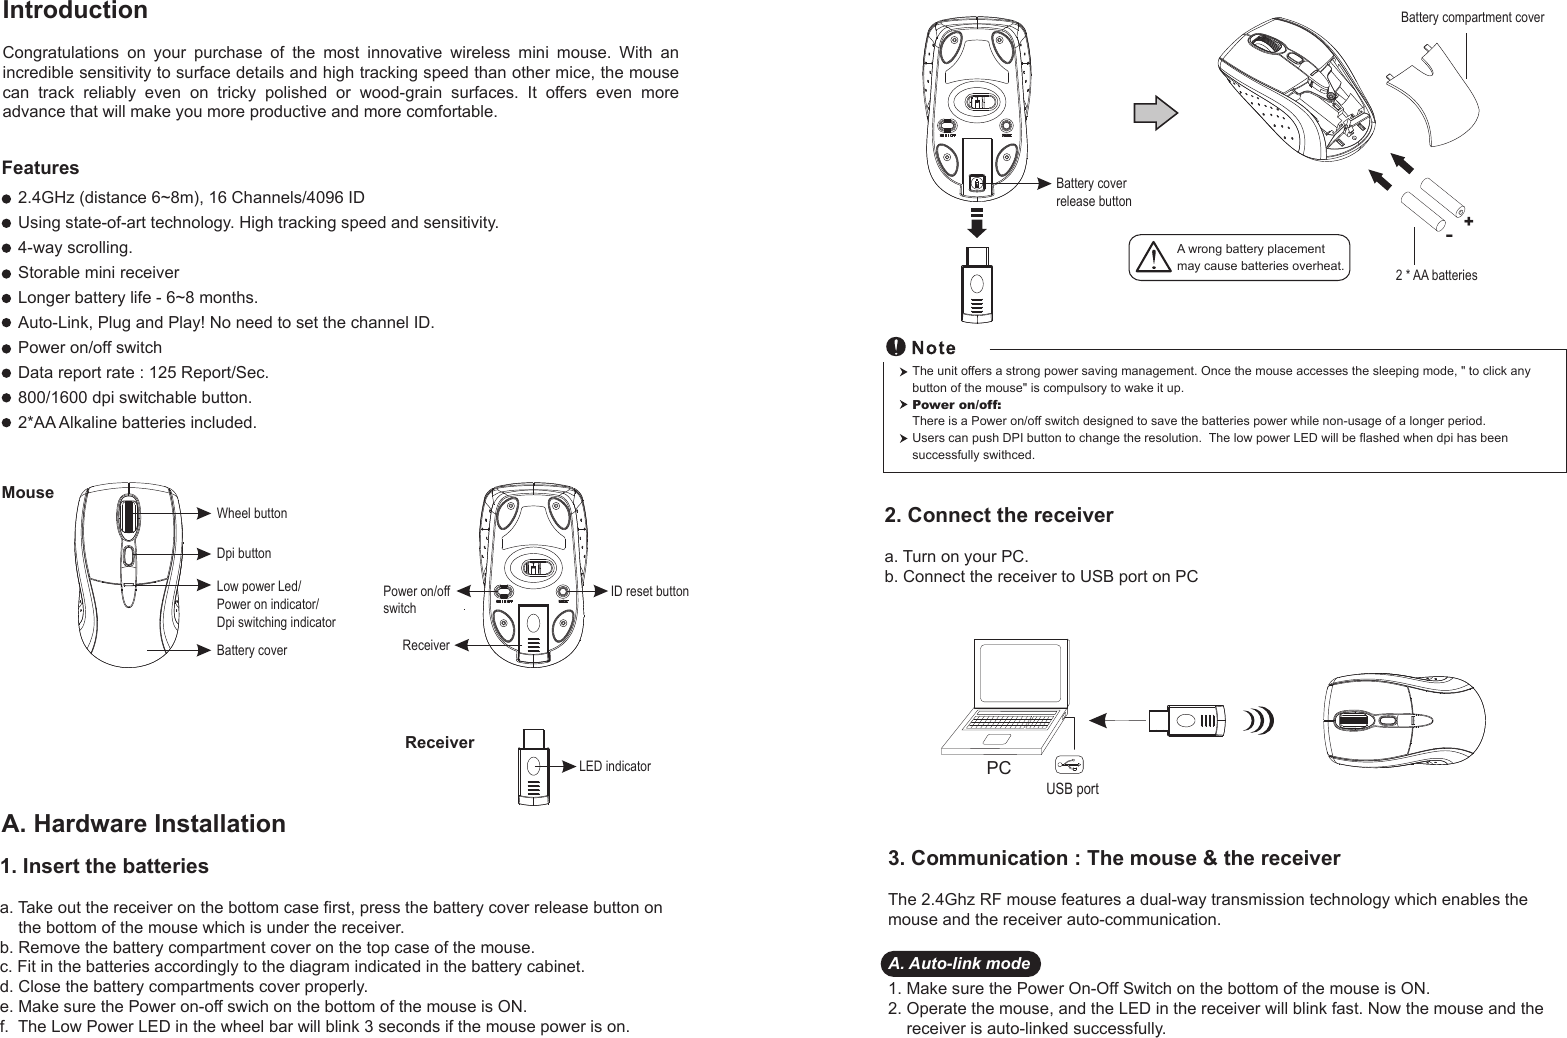 1. Insert the batteriesa. Take out the receiver on the bottom case first, press the battery cover release button on     the bottom of the mouse which is under the receiver.b. Remove the battery compartment cover on the top case of the mouse.c. Fit in the batteries accordingly to the diagram indicated in the battery cabinet.d. Close the battery compartments cover properly.e. Make sure the Power on-off swich on the bottom of the mouse is ON.f.  The Low Power LED in the wheel bar will blink 3 seconds if the mouse power is on.Wheel buttonDpi buttonBattery coverID reset buttonLED indicatorReceiverMouseReceiverIntroductionCongratulations  on  your  purchase  of  the  most  innovative  wireless  mini  mouse.  With  an incredible sensitivity to surface details and high tracking speed than other mice, the mouse can  track  reliably  even  on  tricky  polished  or  wood-grain  surfaces.  It  offers  even  more advance that will make you more productive and more comfortable.A. Hardware Installation2.4GHz (distance 6~8m), 16 Channels/4096 IDUsing state-of-art technology. High tracking speed and sensitivity.4-way scrolling.Storable mini receiverLonger battery life - 6~8 months.Auto-Link, Plug and Play! No need to set the channel ID.Power on/off switchData report rate : 125 Report/Sec. 800/1600 dpi switchable button.2*AA Alkaline batteries included. Power on/offswitchFeatures+-A wrong battery placementmay cause batteries overheat.Battery compartment cover2 * AA batteriesBattery cover release buttonLow power Led/Power on indicator/Dpi switching indicator2. Connect the receivera. Turn on your PC.b. Connect the receiver to USB port on PCPCUSB portThe unit offers a strong power saving management. Once the mouse accesses the sleeping mode, &quot; to click any button of the mouse&quot; is compulsory to wake it up.Power on/off: There is a Power on/off switch designed to save the batteries power while non-usage of a longer period.Users can push DPI button to change the resolution.  The low power LED will be flashed when dpi has been successfully swithced.3. Communication : The mouse &amp; the receiverThe 2.4Ghz RF mouse features a dual-way transmission technology which enables the mouse and the receiver auto-communication.A. Auto-link mode1. Make sure the Power On-Off Switch on the bottom of the mouse is ON.2. Operate the mouse, and the LED in the receiver will blink fast. Now the mouse and the     receiver is auto-linked successfully.